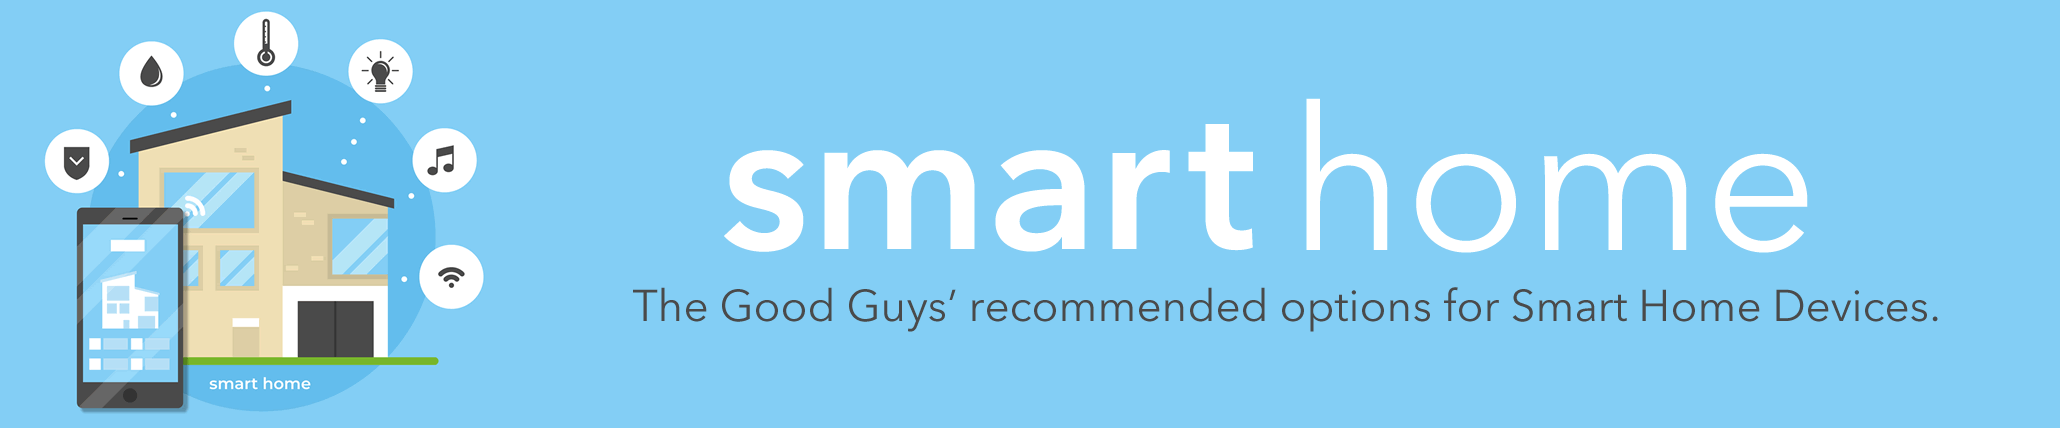 Smart Home Recommendations: The Good Guys' recommended options for Smart Home Devices